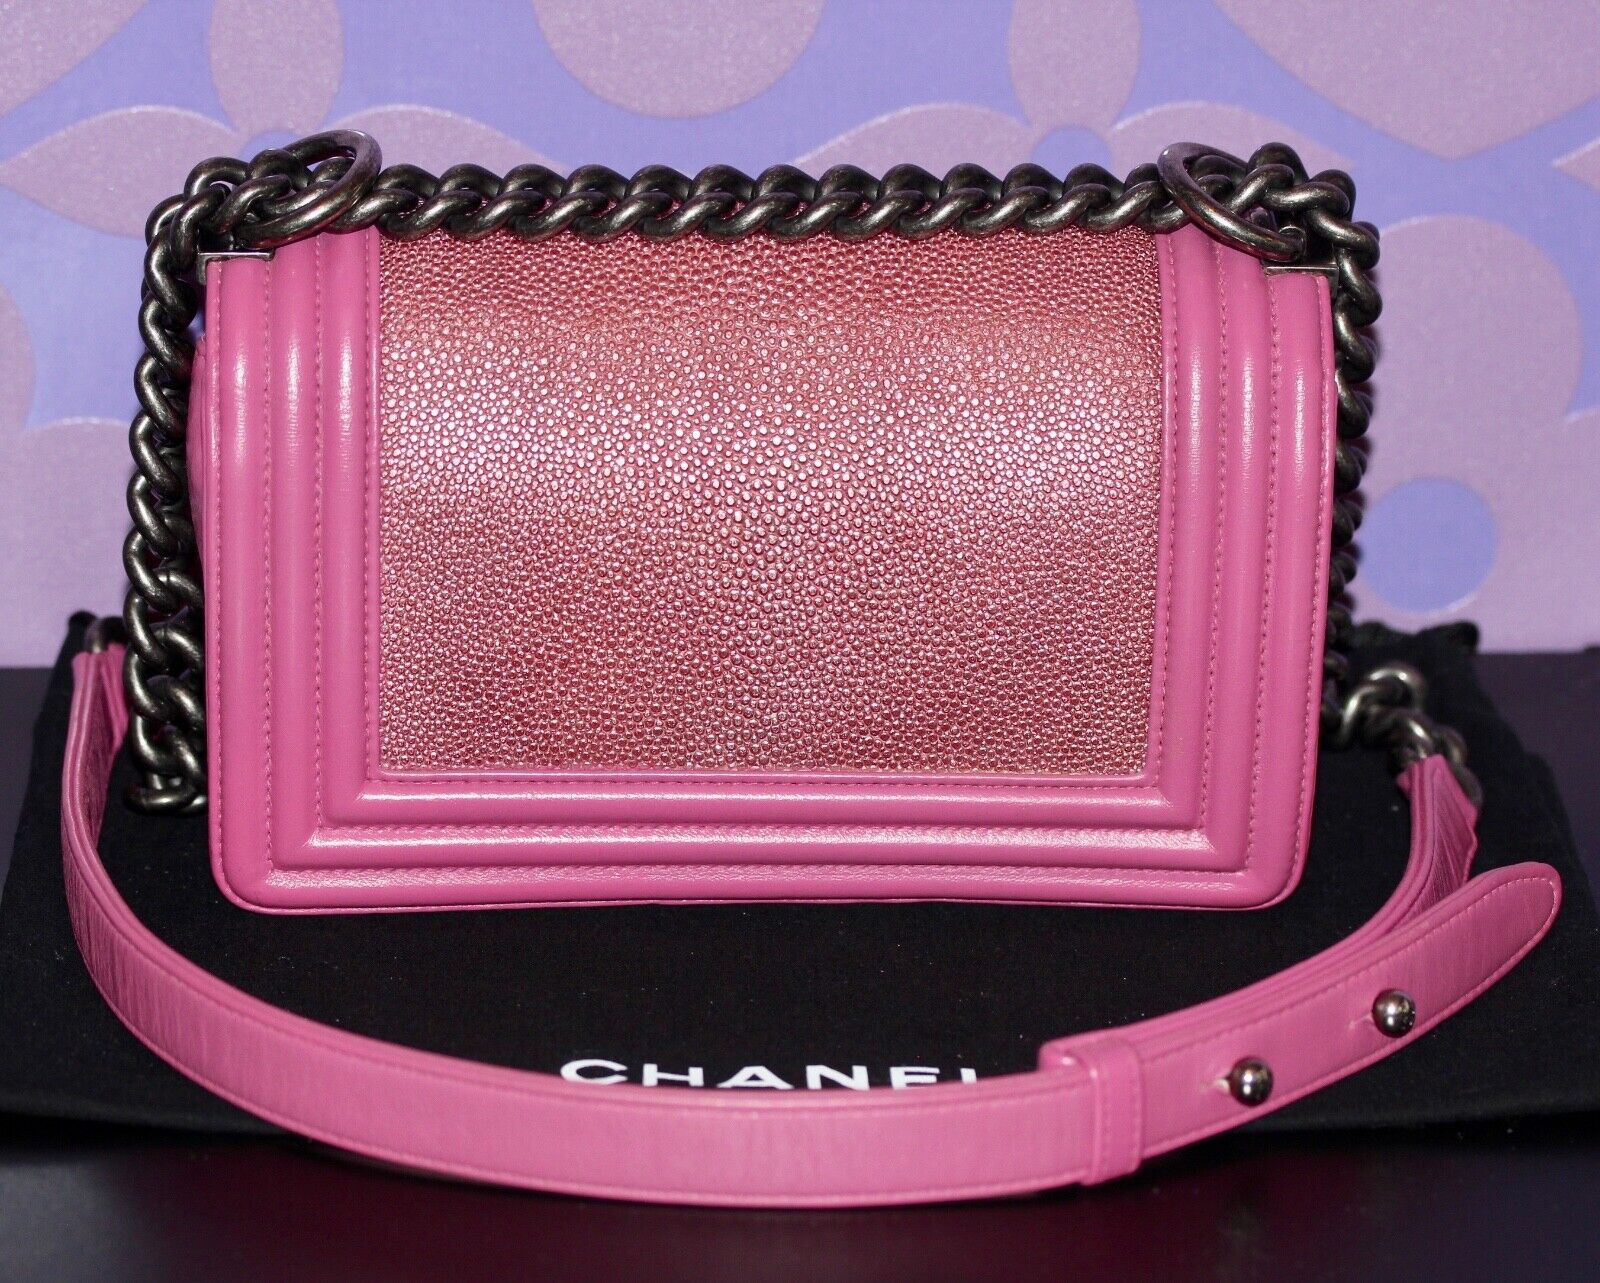 CHANEL Le BOY Small Galuchat Stingray Exotic Pink Flap Chain Bag  *DISCONTINUED*!